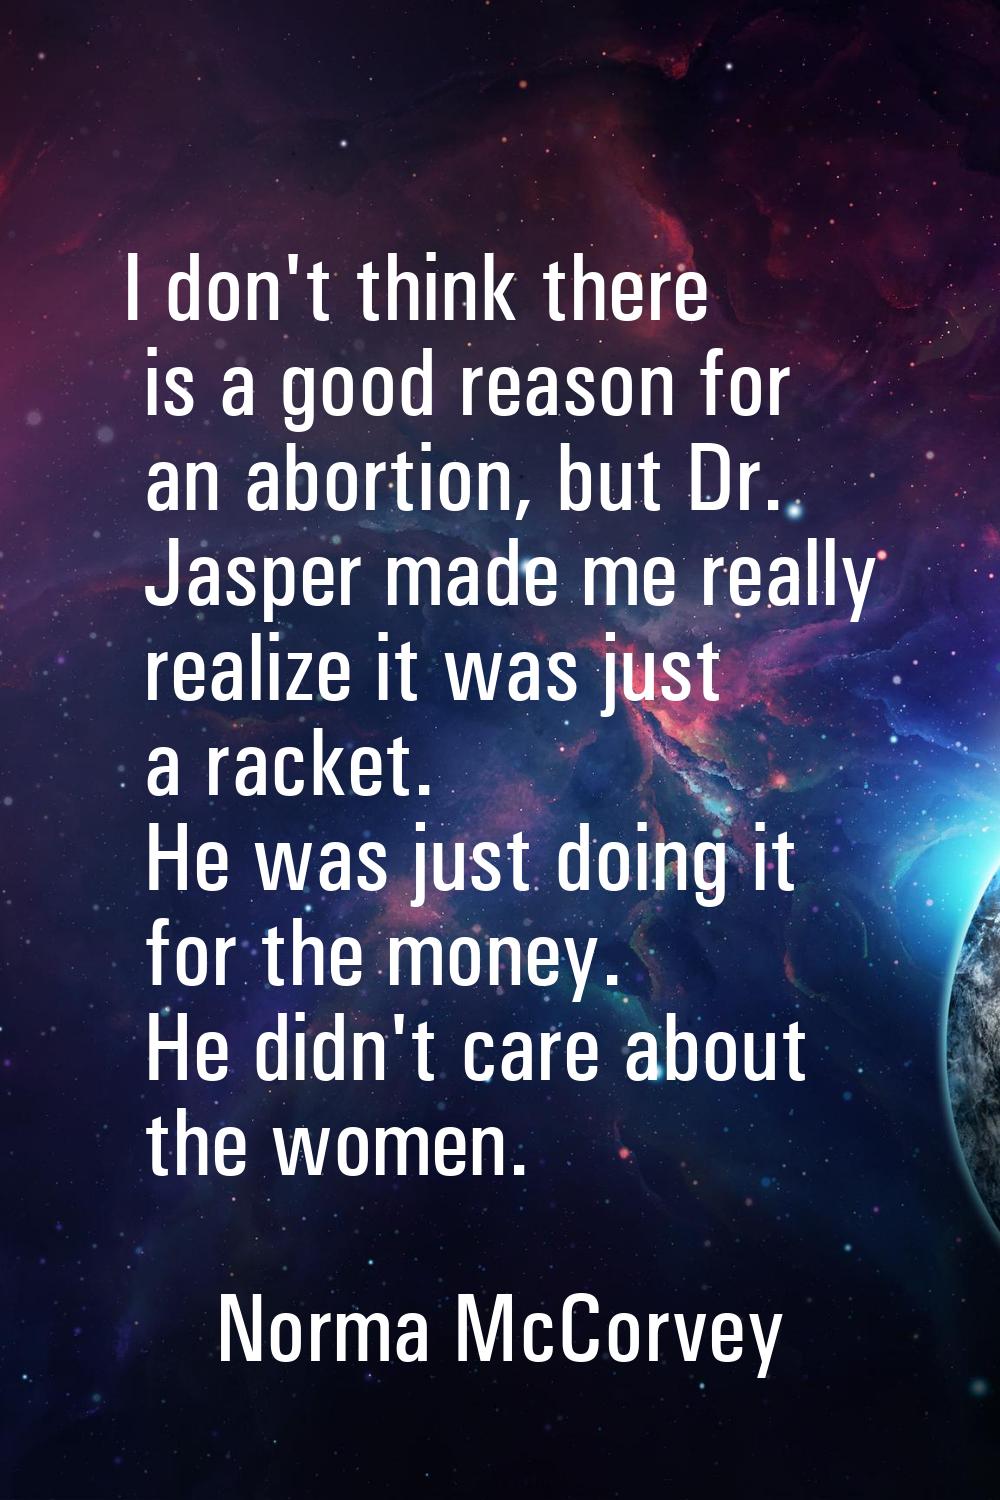 I don't think there is a good reason for an abortion, but Dr. Jasper made me really realize it was 